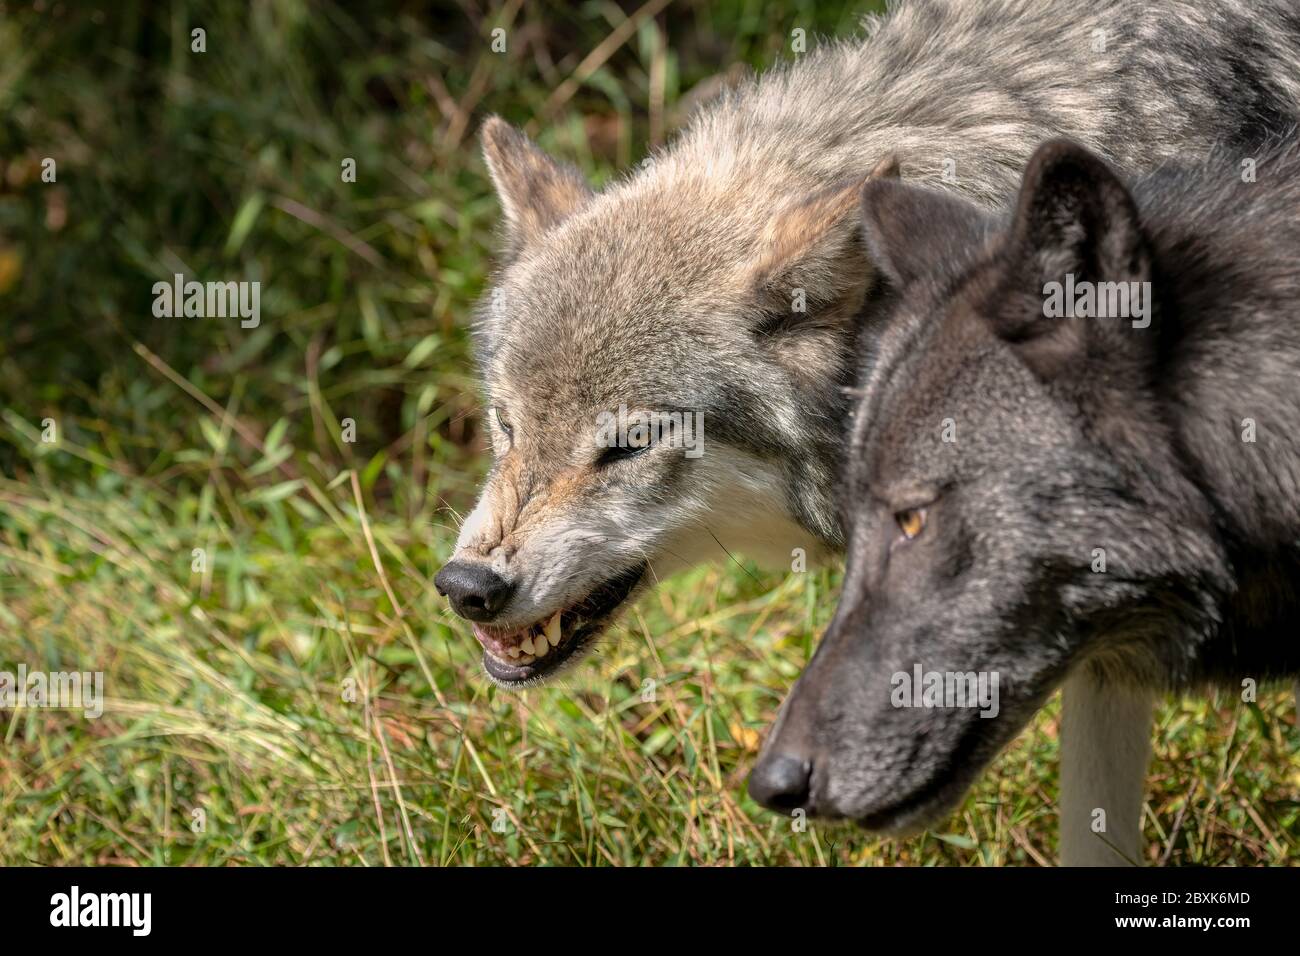 Close up of two gray wolves (timber wolves), one with gray fur, the other with black fur. The gray wolf is snarling at the other, showing its teeth. Stock Photo